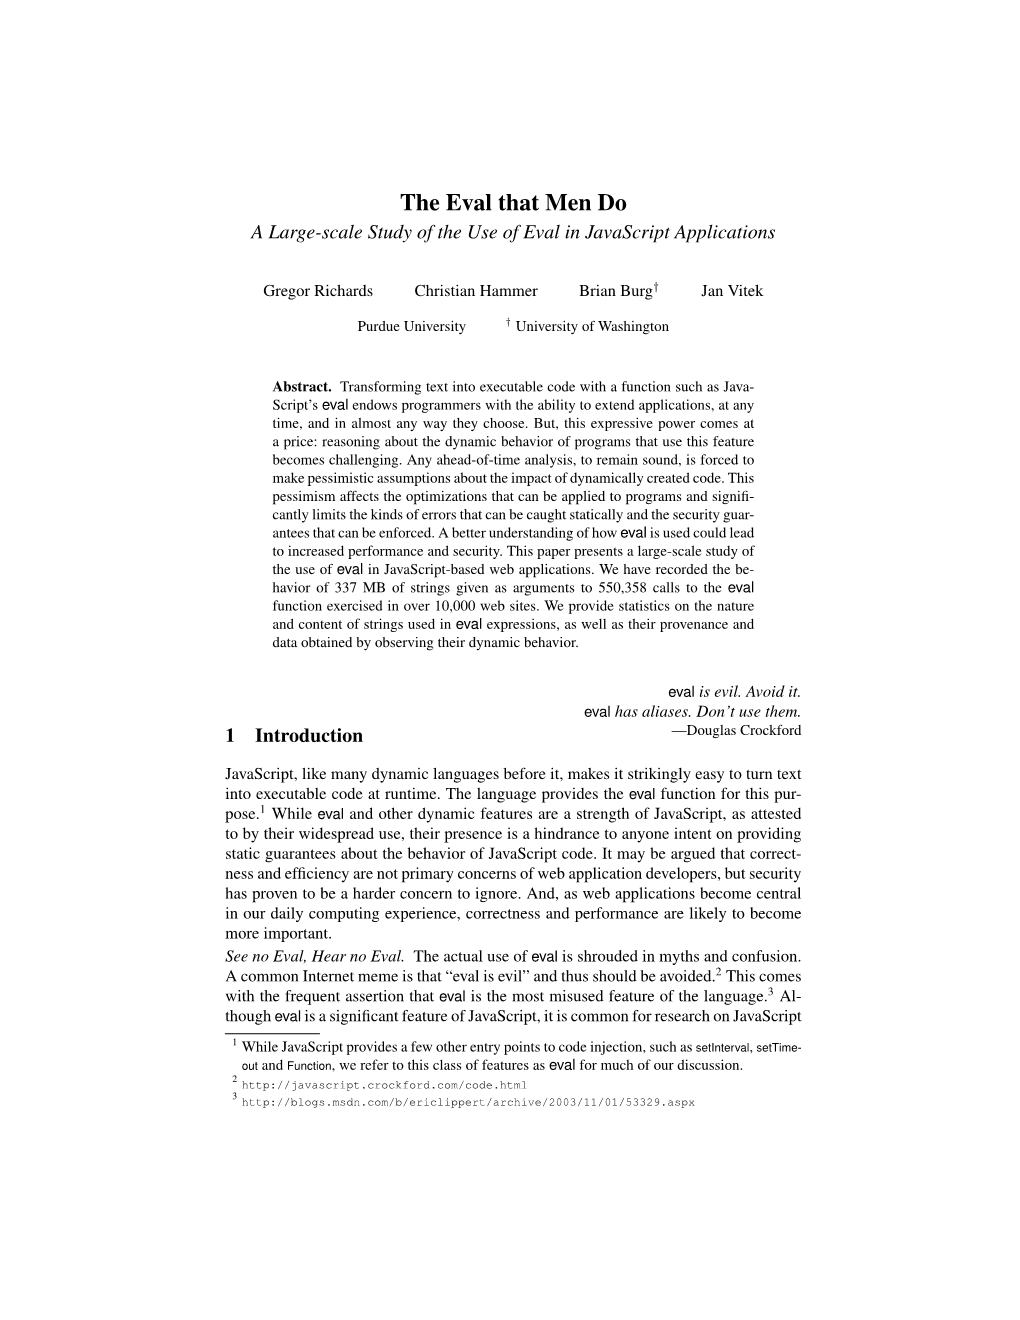 The Eval That Men Do a Large-Scale Study of the Use of Eval in Javascript Applications